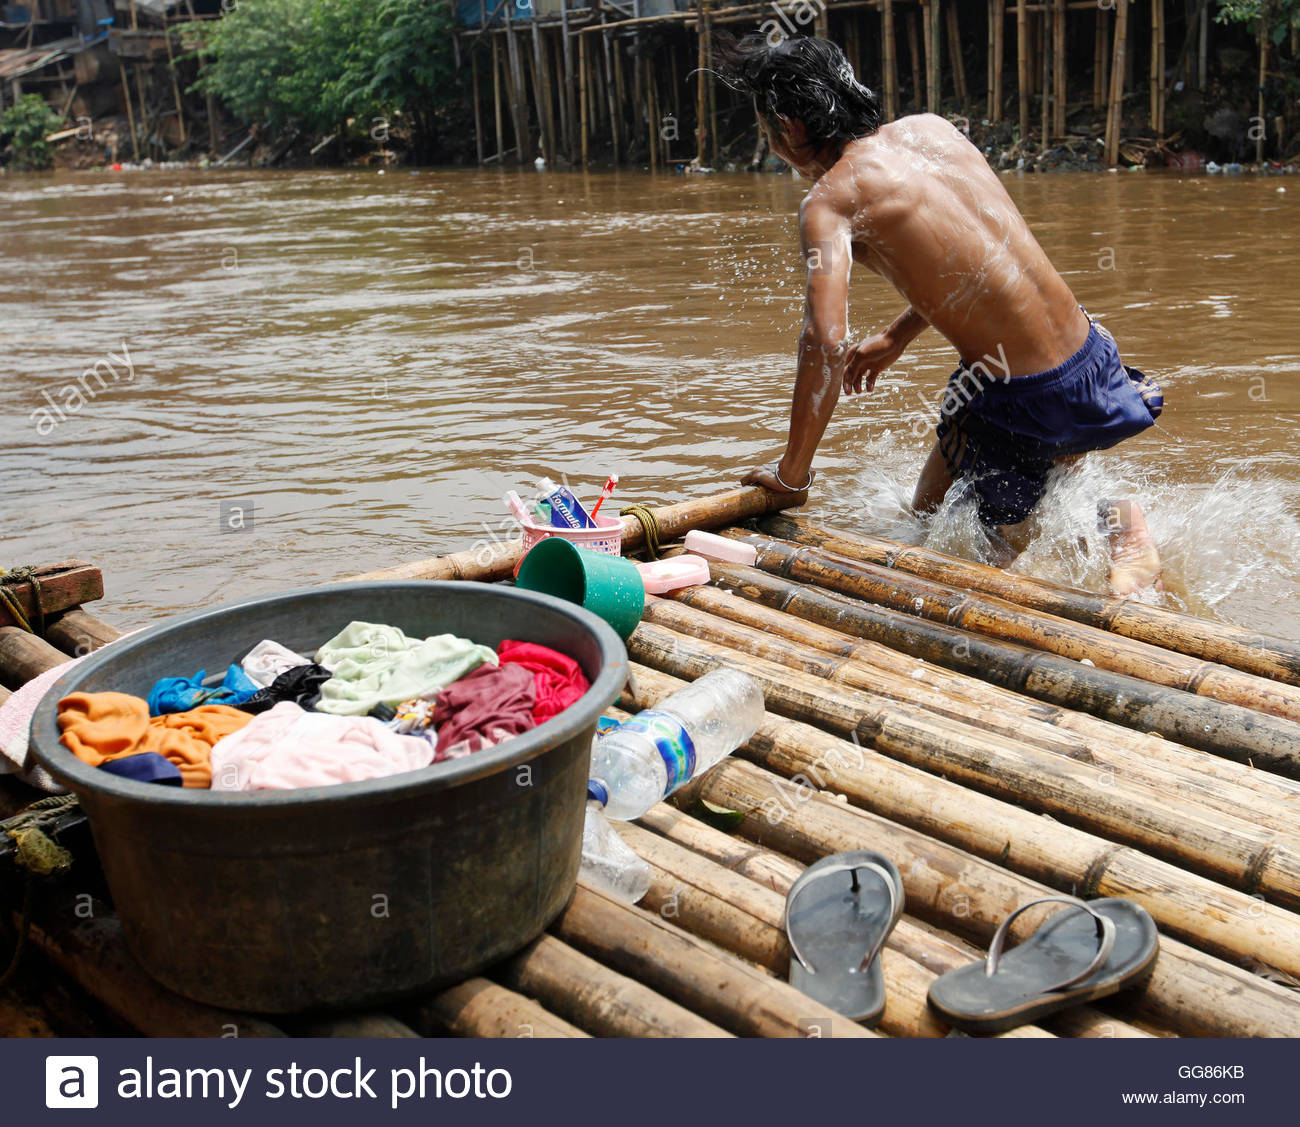 A man living near Ciliwung river takes a bath in the river at a Jakarta slum area (Alamy Stock Photo,  REUTERS , April 20 2012). 